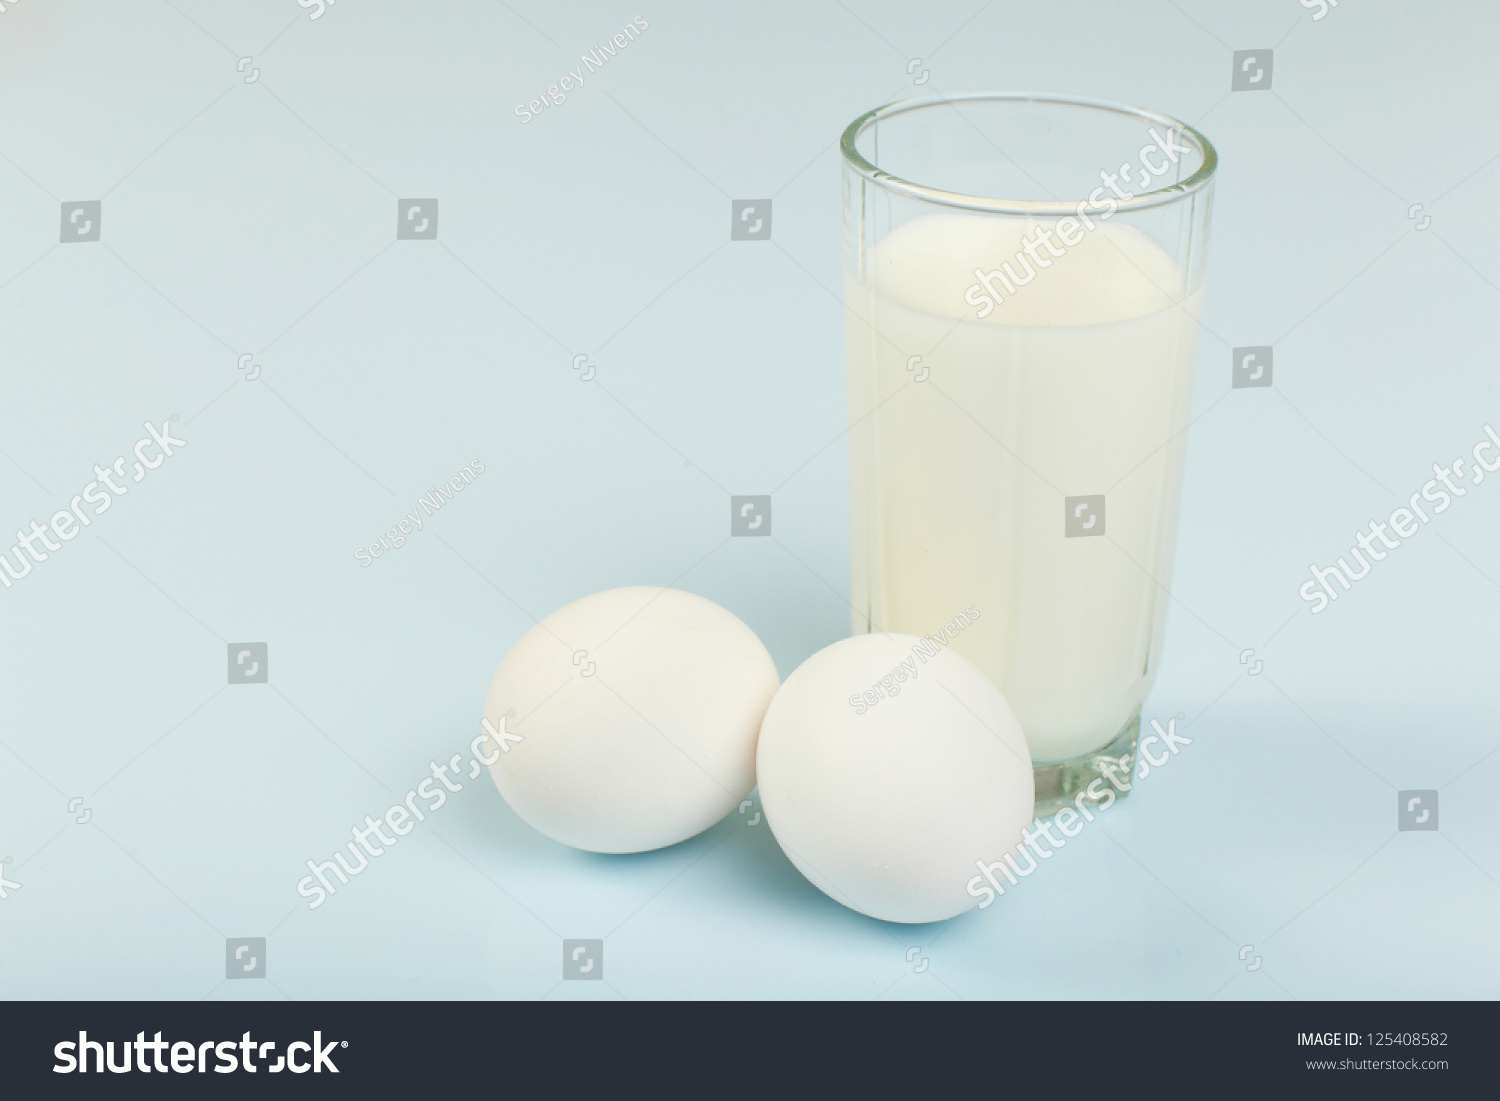 Milk in a glass jar and eggs on the table #125408582